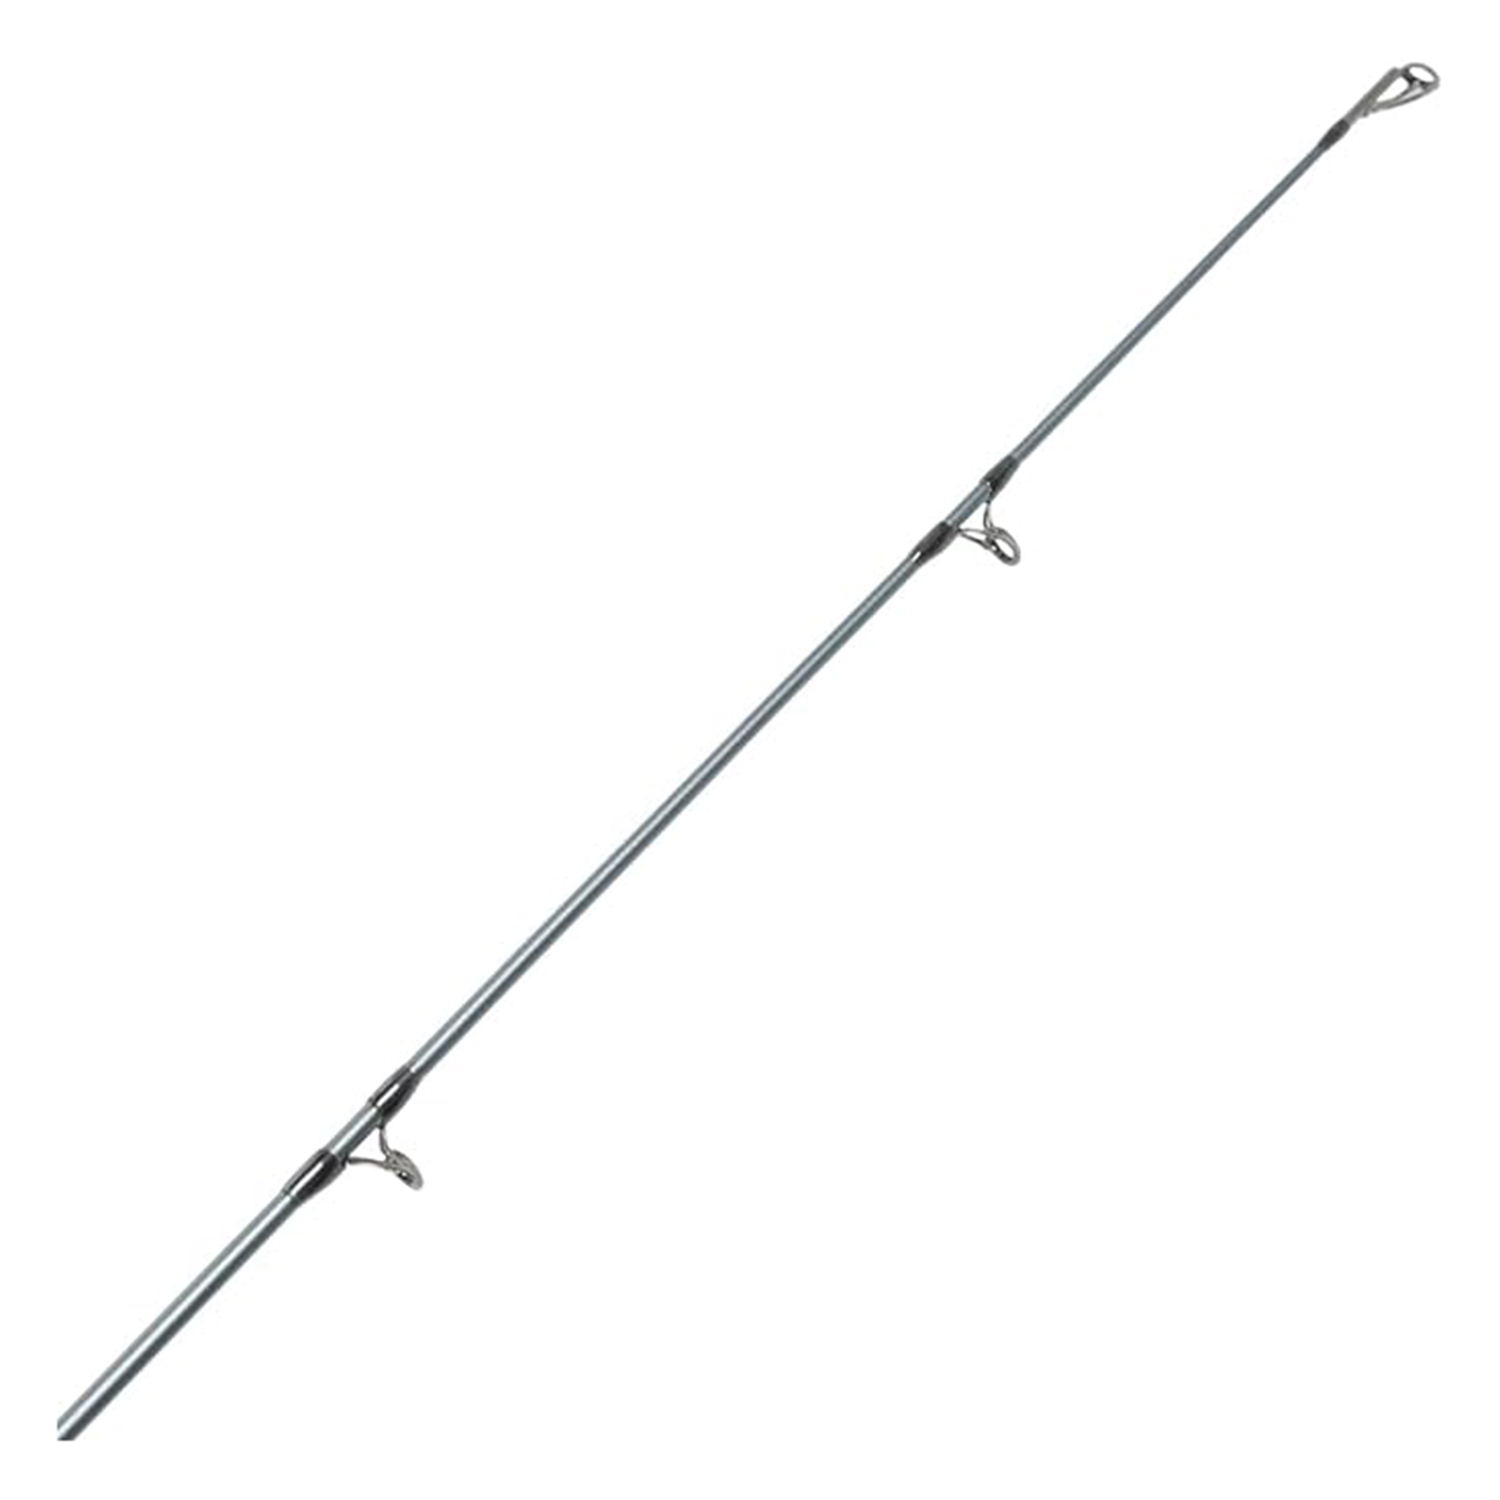  TBMAQ Carbon Short Joint, Multi-Point, sub-Rod, Straight  Handle, with a Shrinkage of Less Than 50 cm L, Adjustable Bayonet Rod,  European and American Flying Fishing Rod : Sports & Outdoors